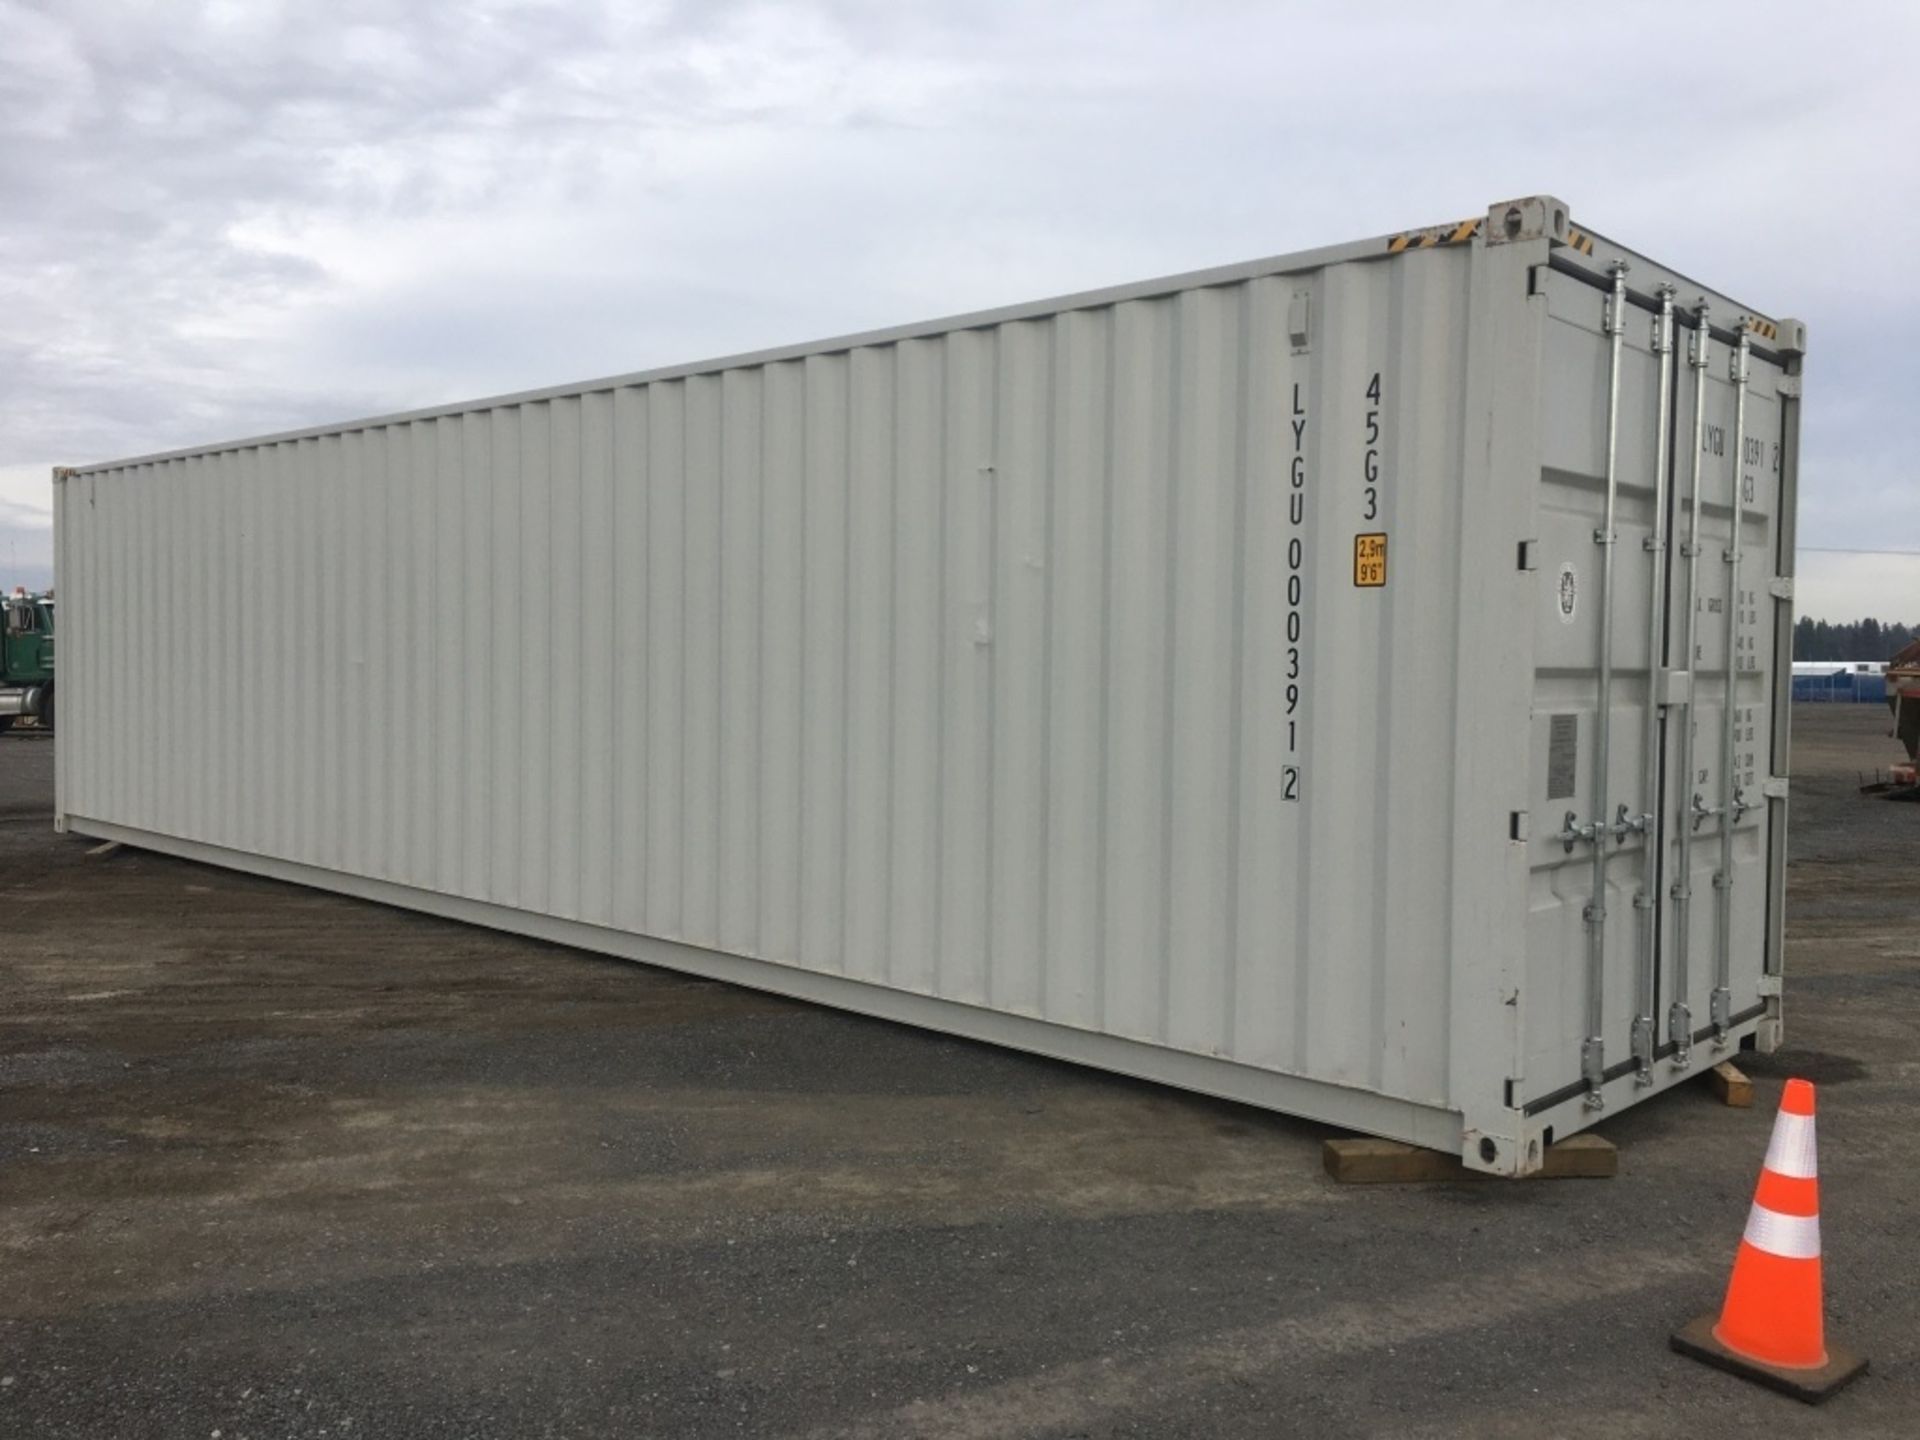 2020 Wolverine 40' Shipping Container - Image 4 of 6